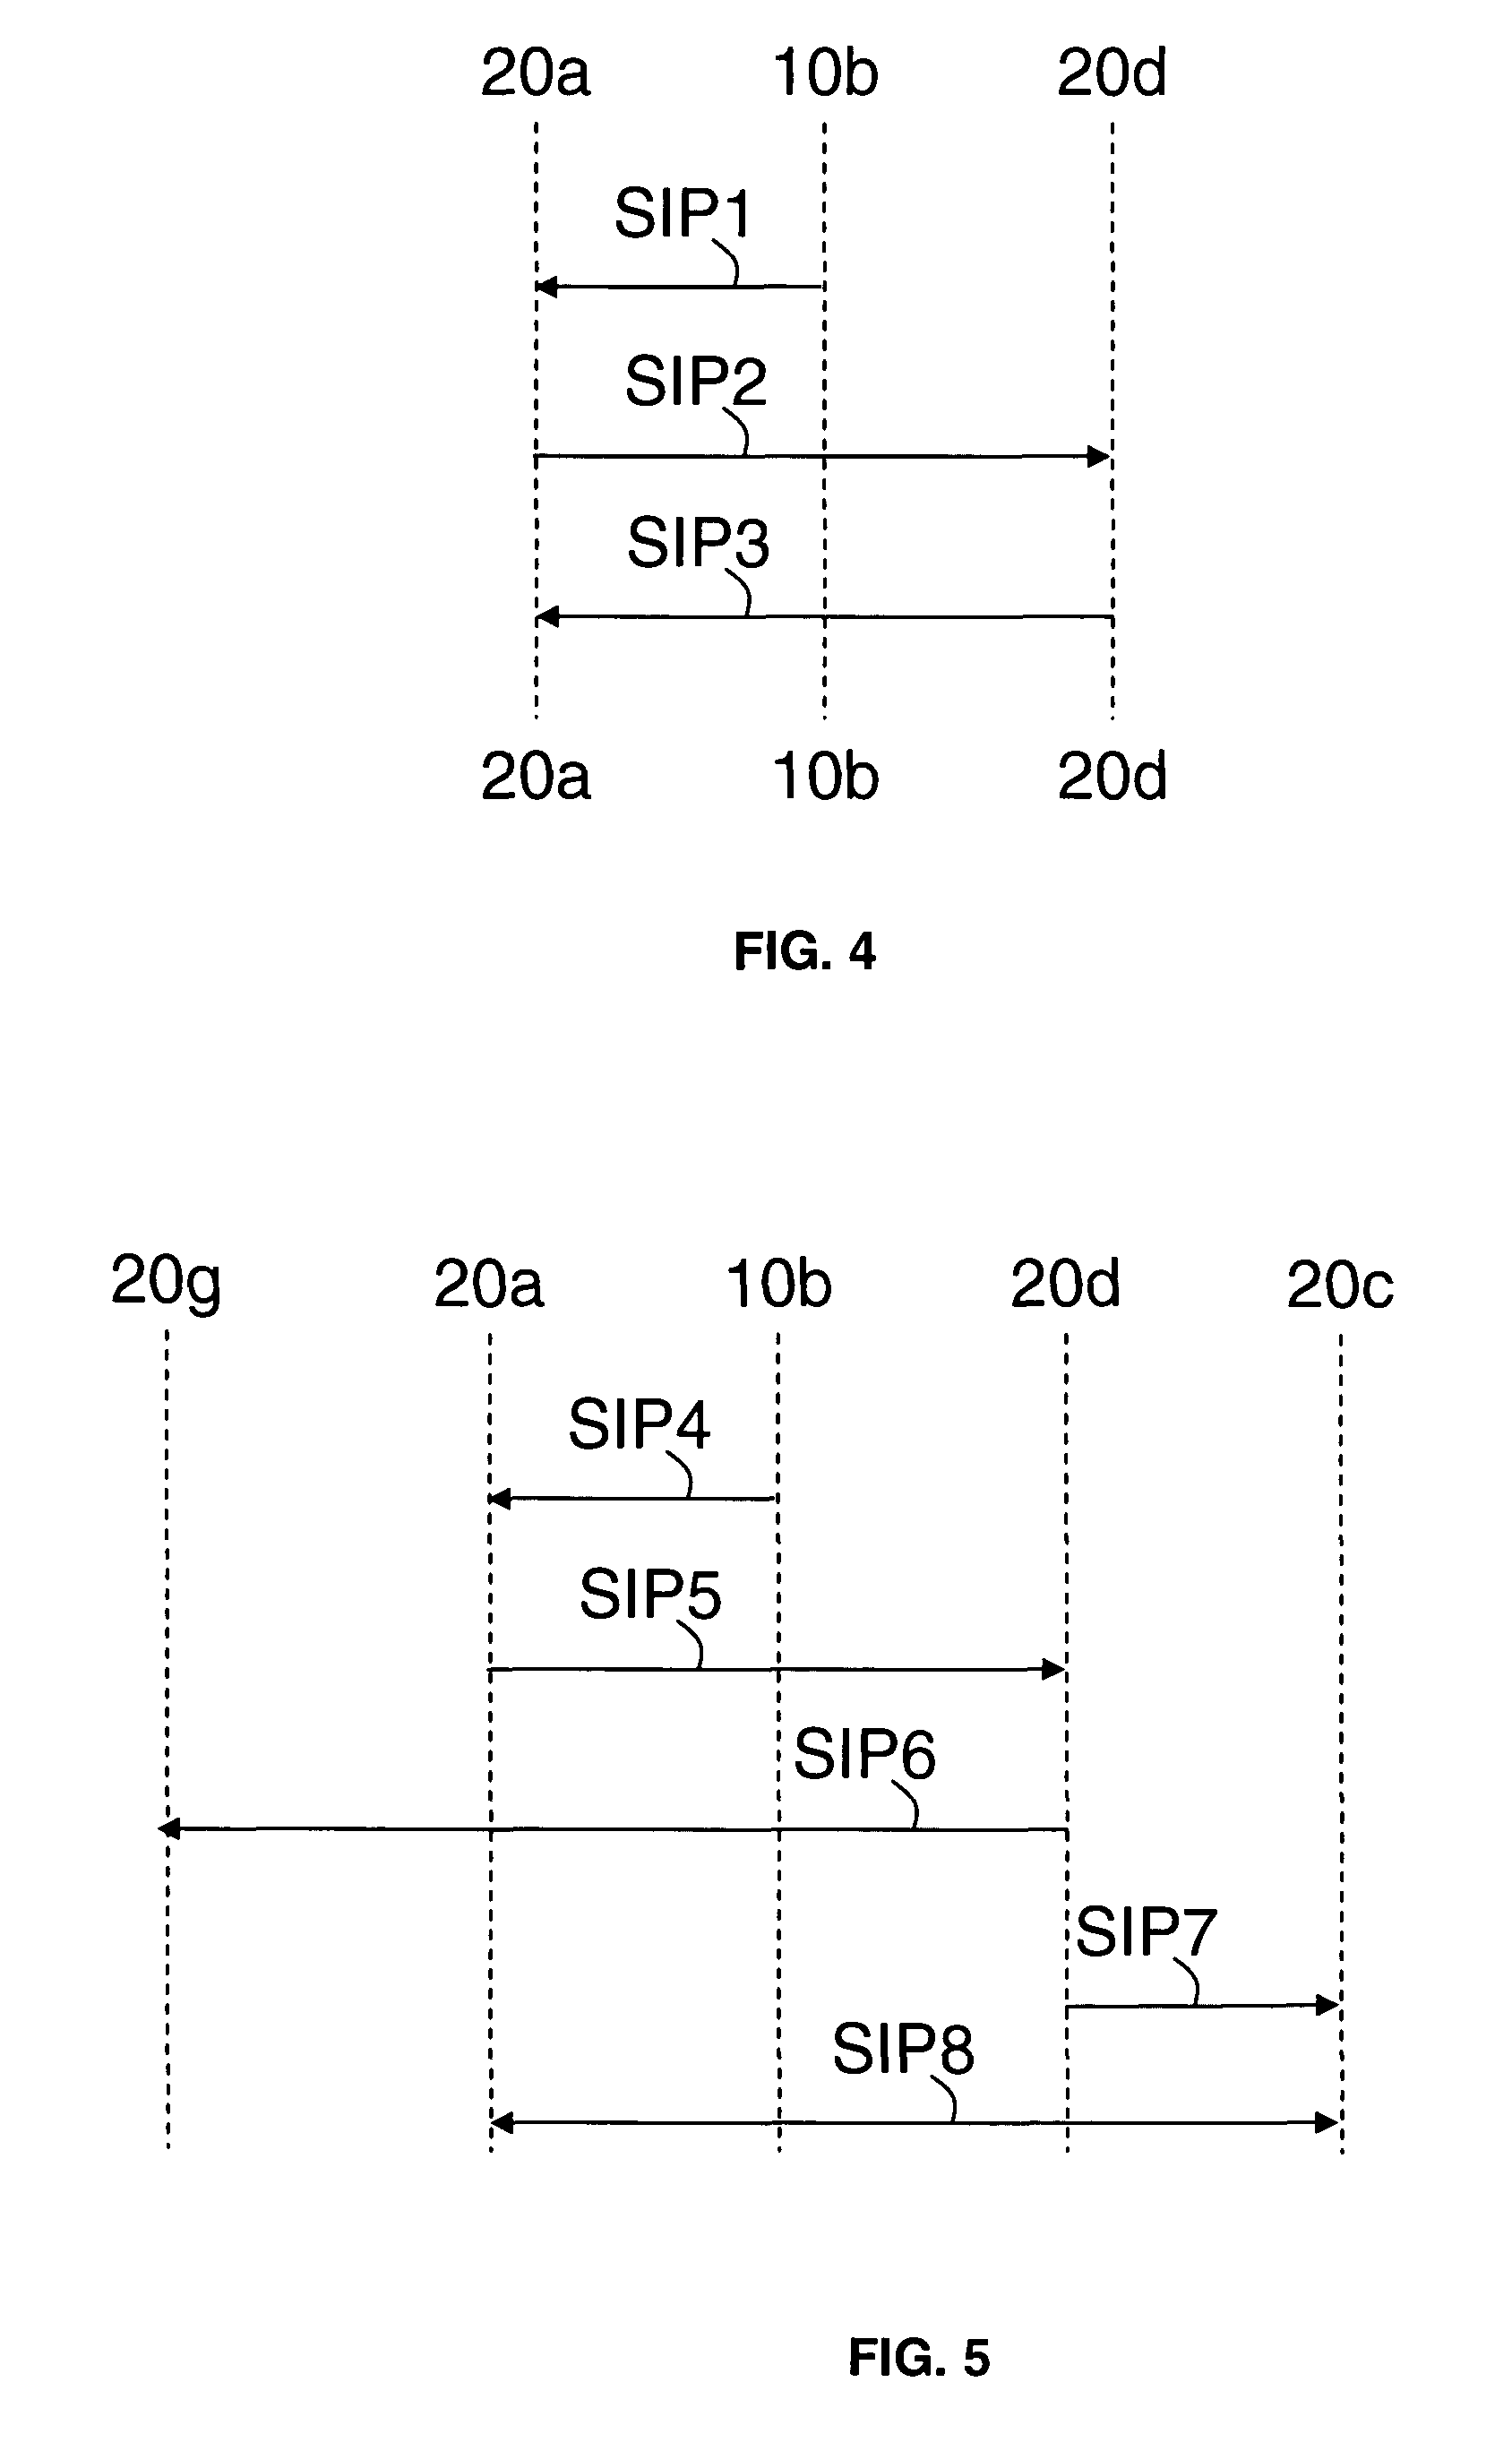 System and method for establishment of a client/server type relationship in a peer-to-peer network